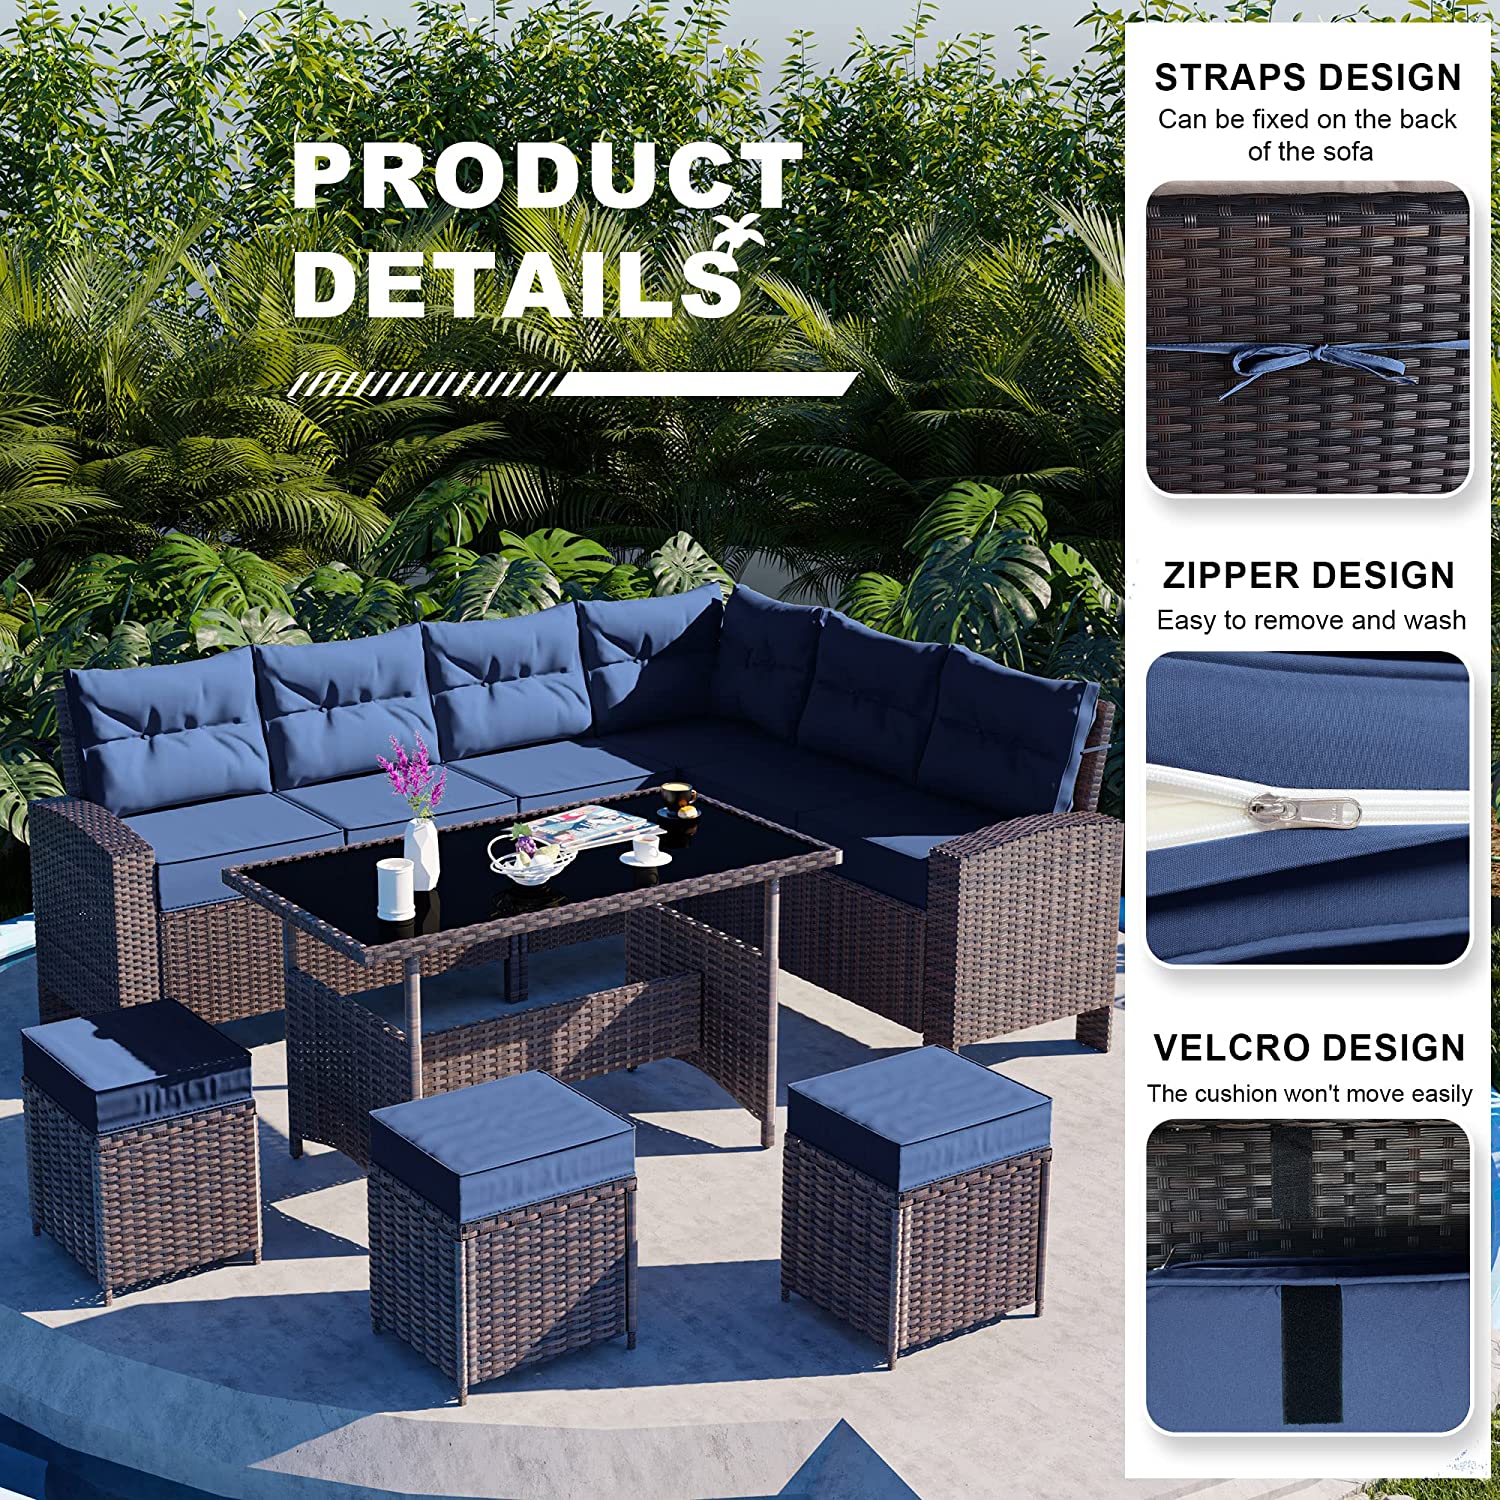 Kullavik 7 Pieces Outdoor Patio Furniture Set, All-Weather Patio Outdoor Dining Conversation Sectional Set with Coffee Table, Wicker Sofas, Ottomans, Removable Cushions,Navy Blue - image 2 of 7